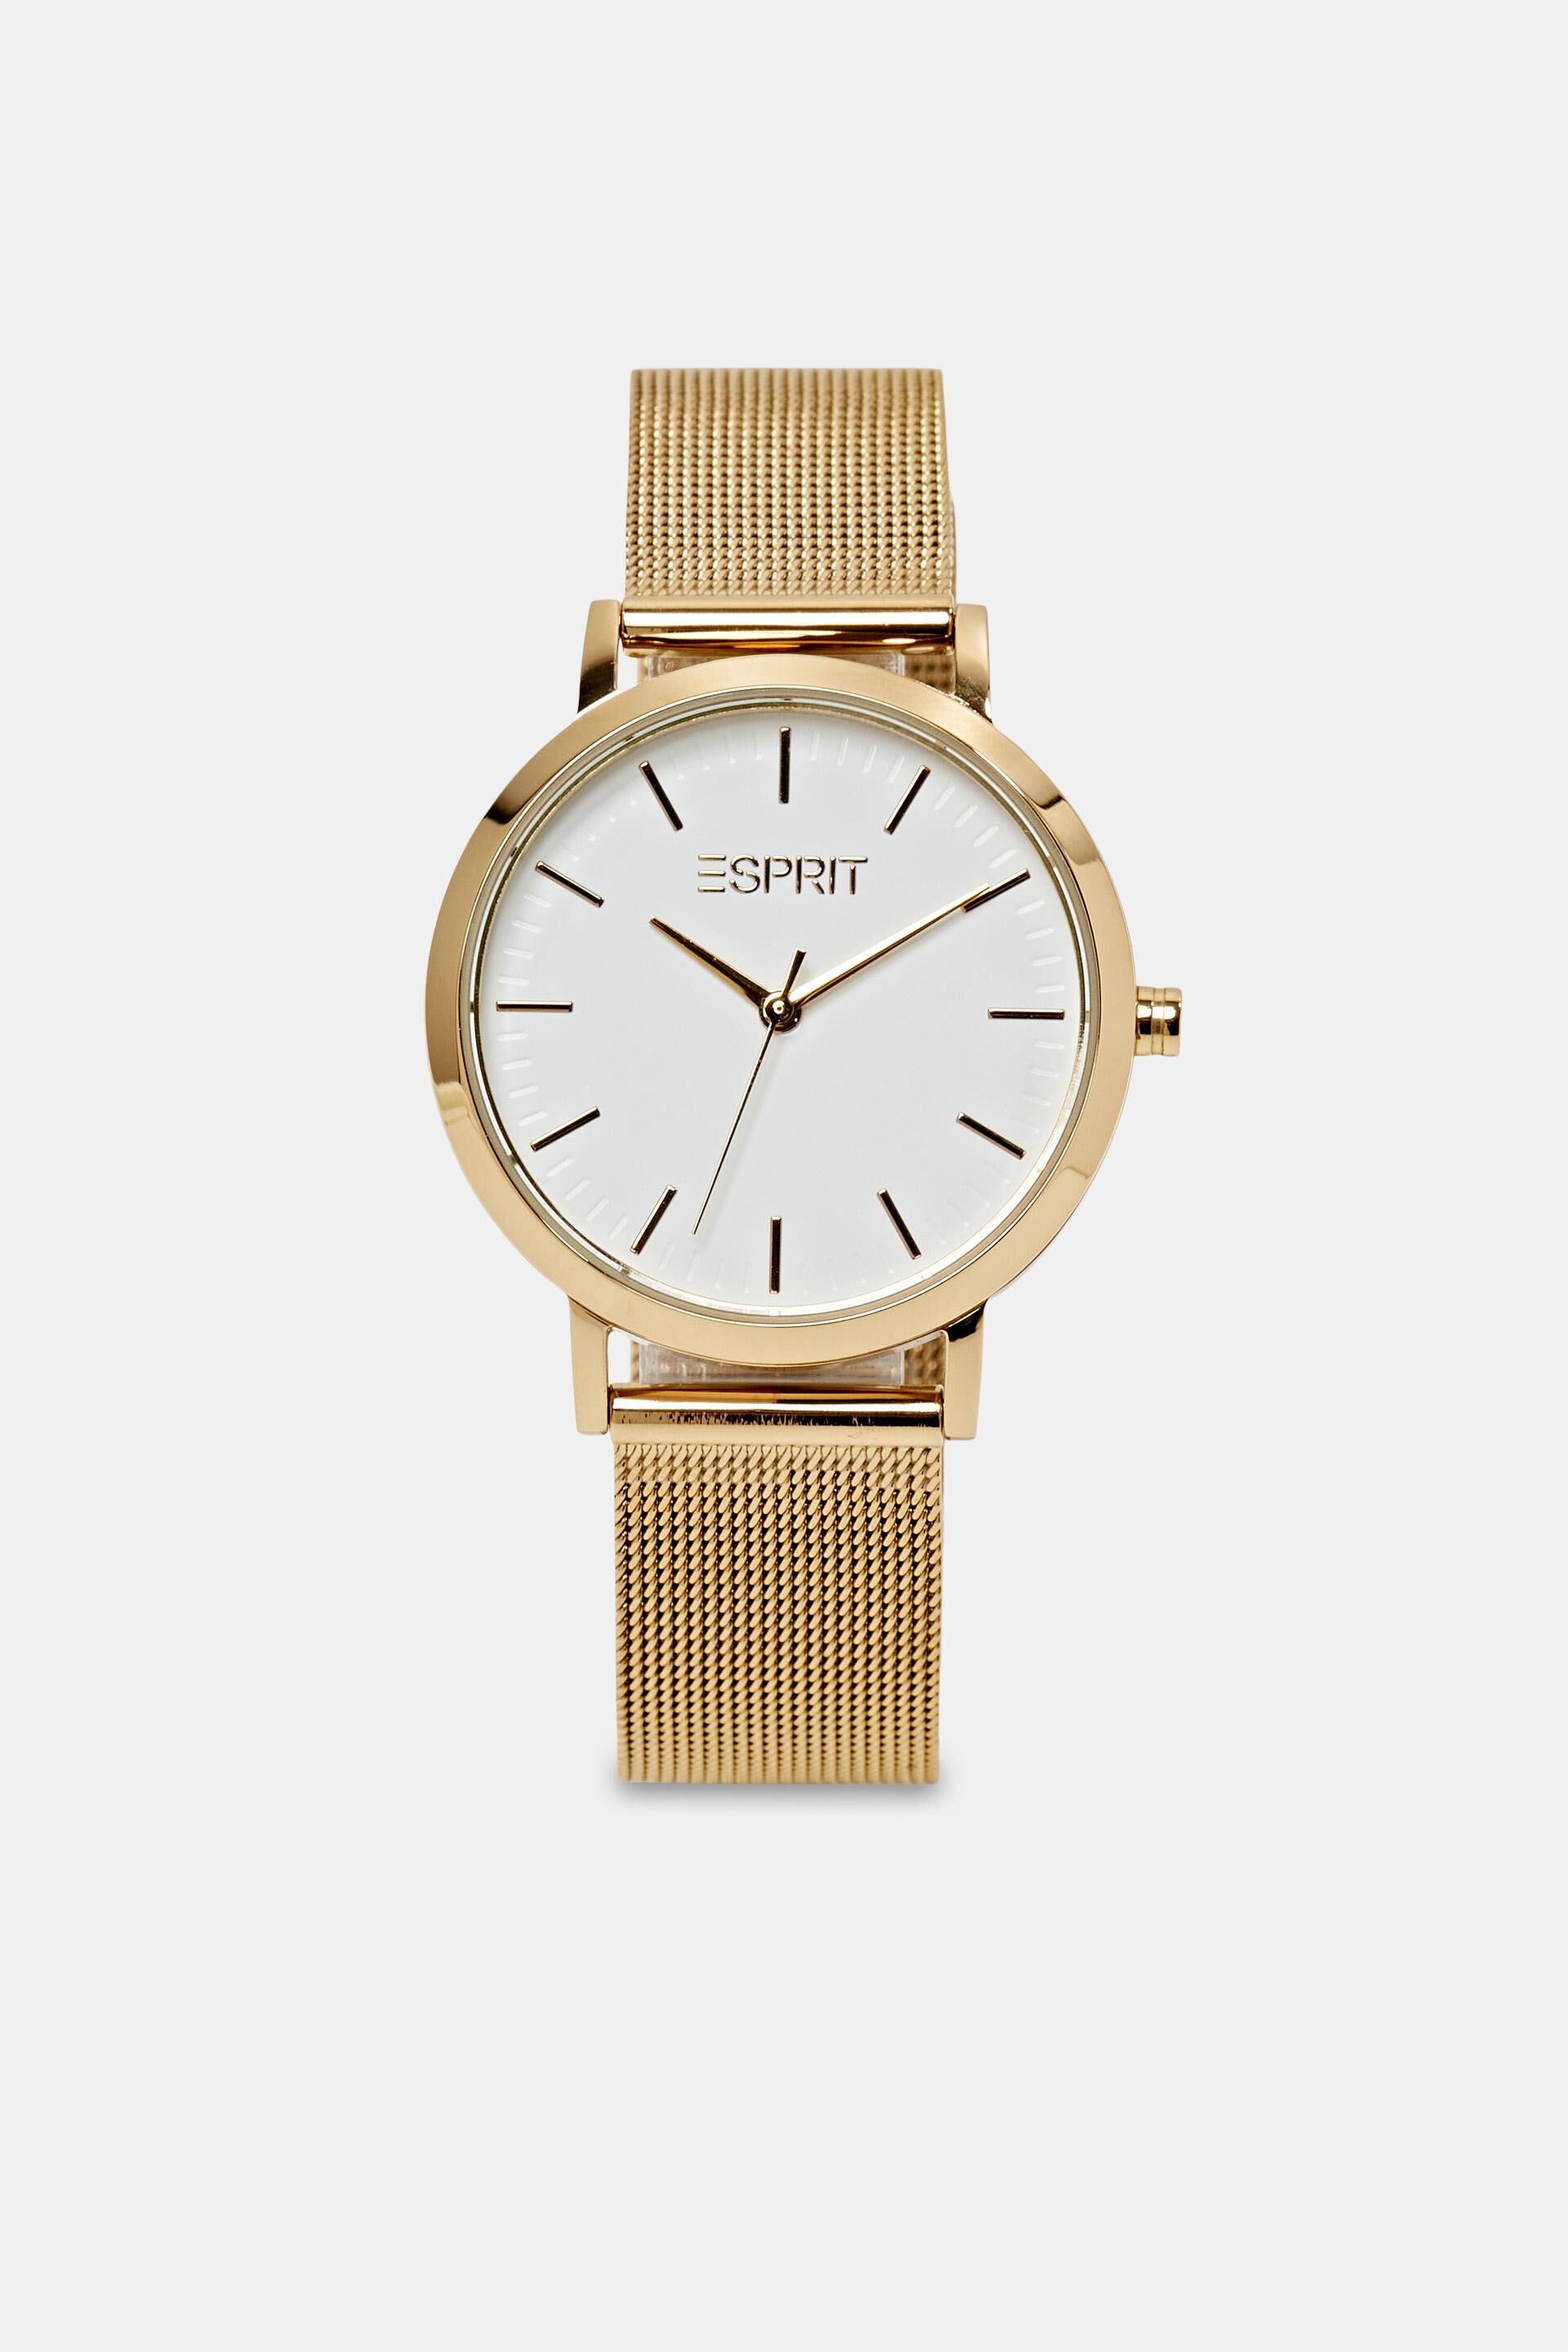 Esprit Online Store Stainless steel watch with a mesh strap